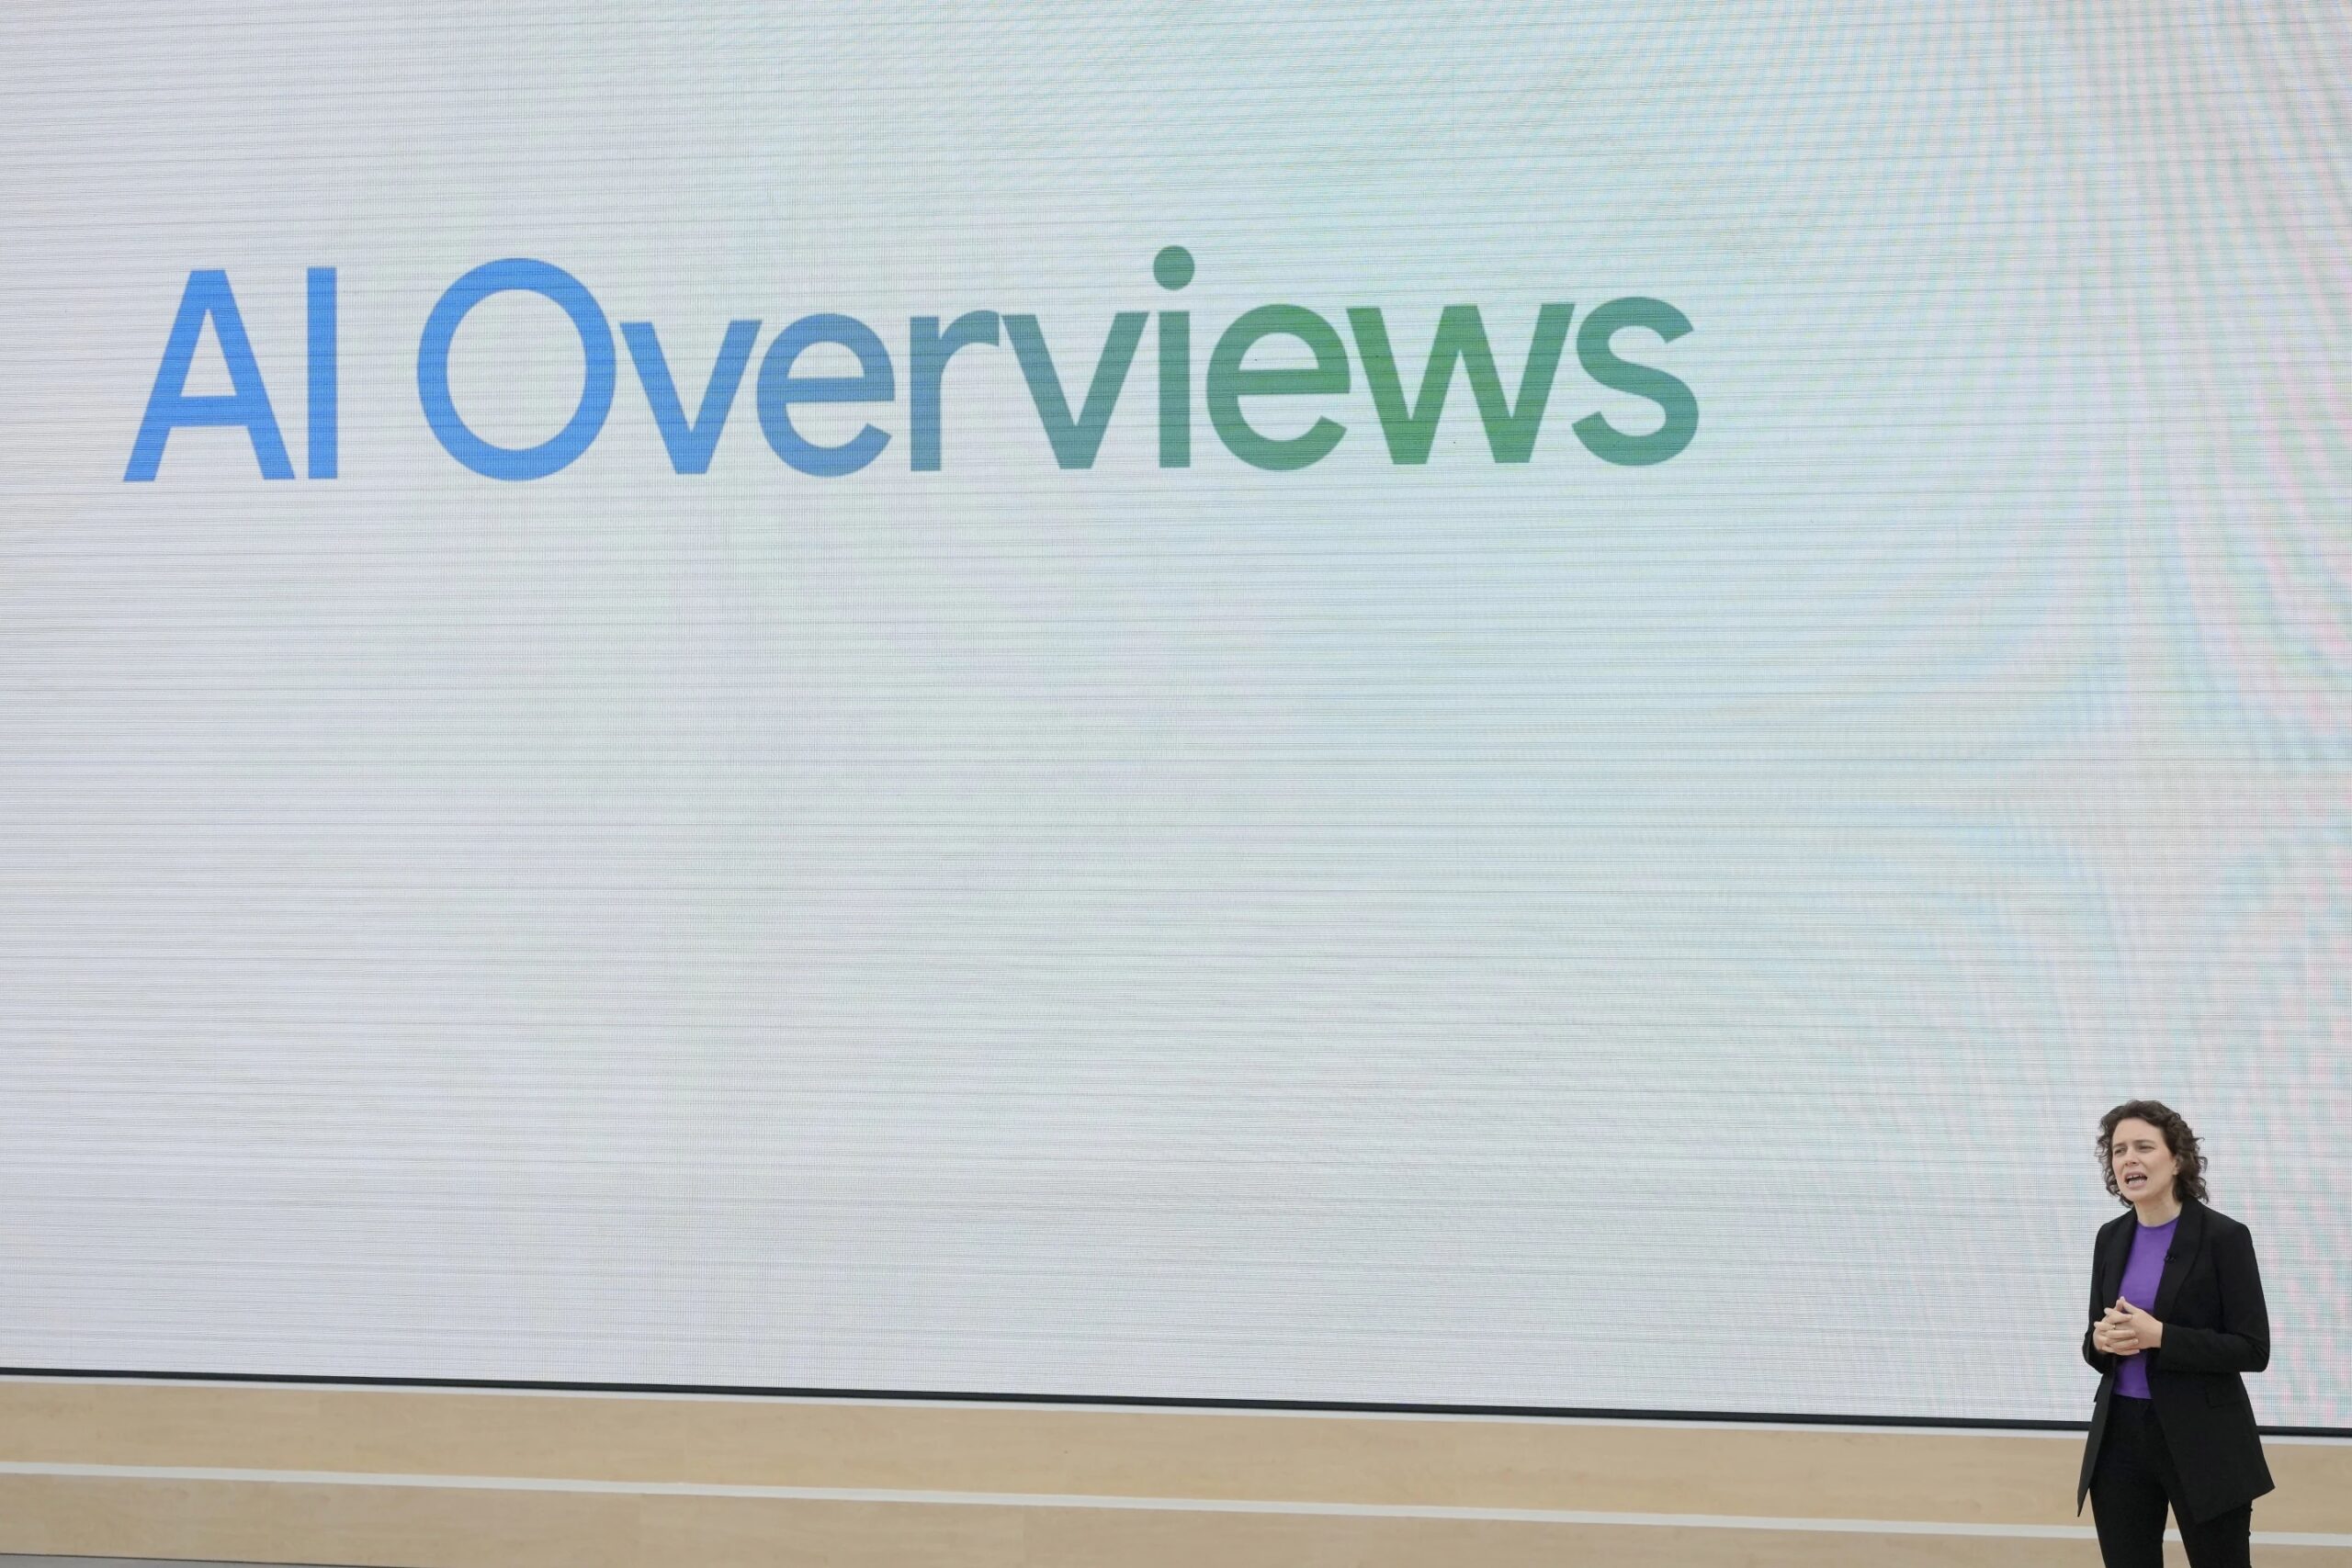 Liz Reid, Google head of Search, speaks at a Google I/O event in Mountain View